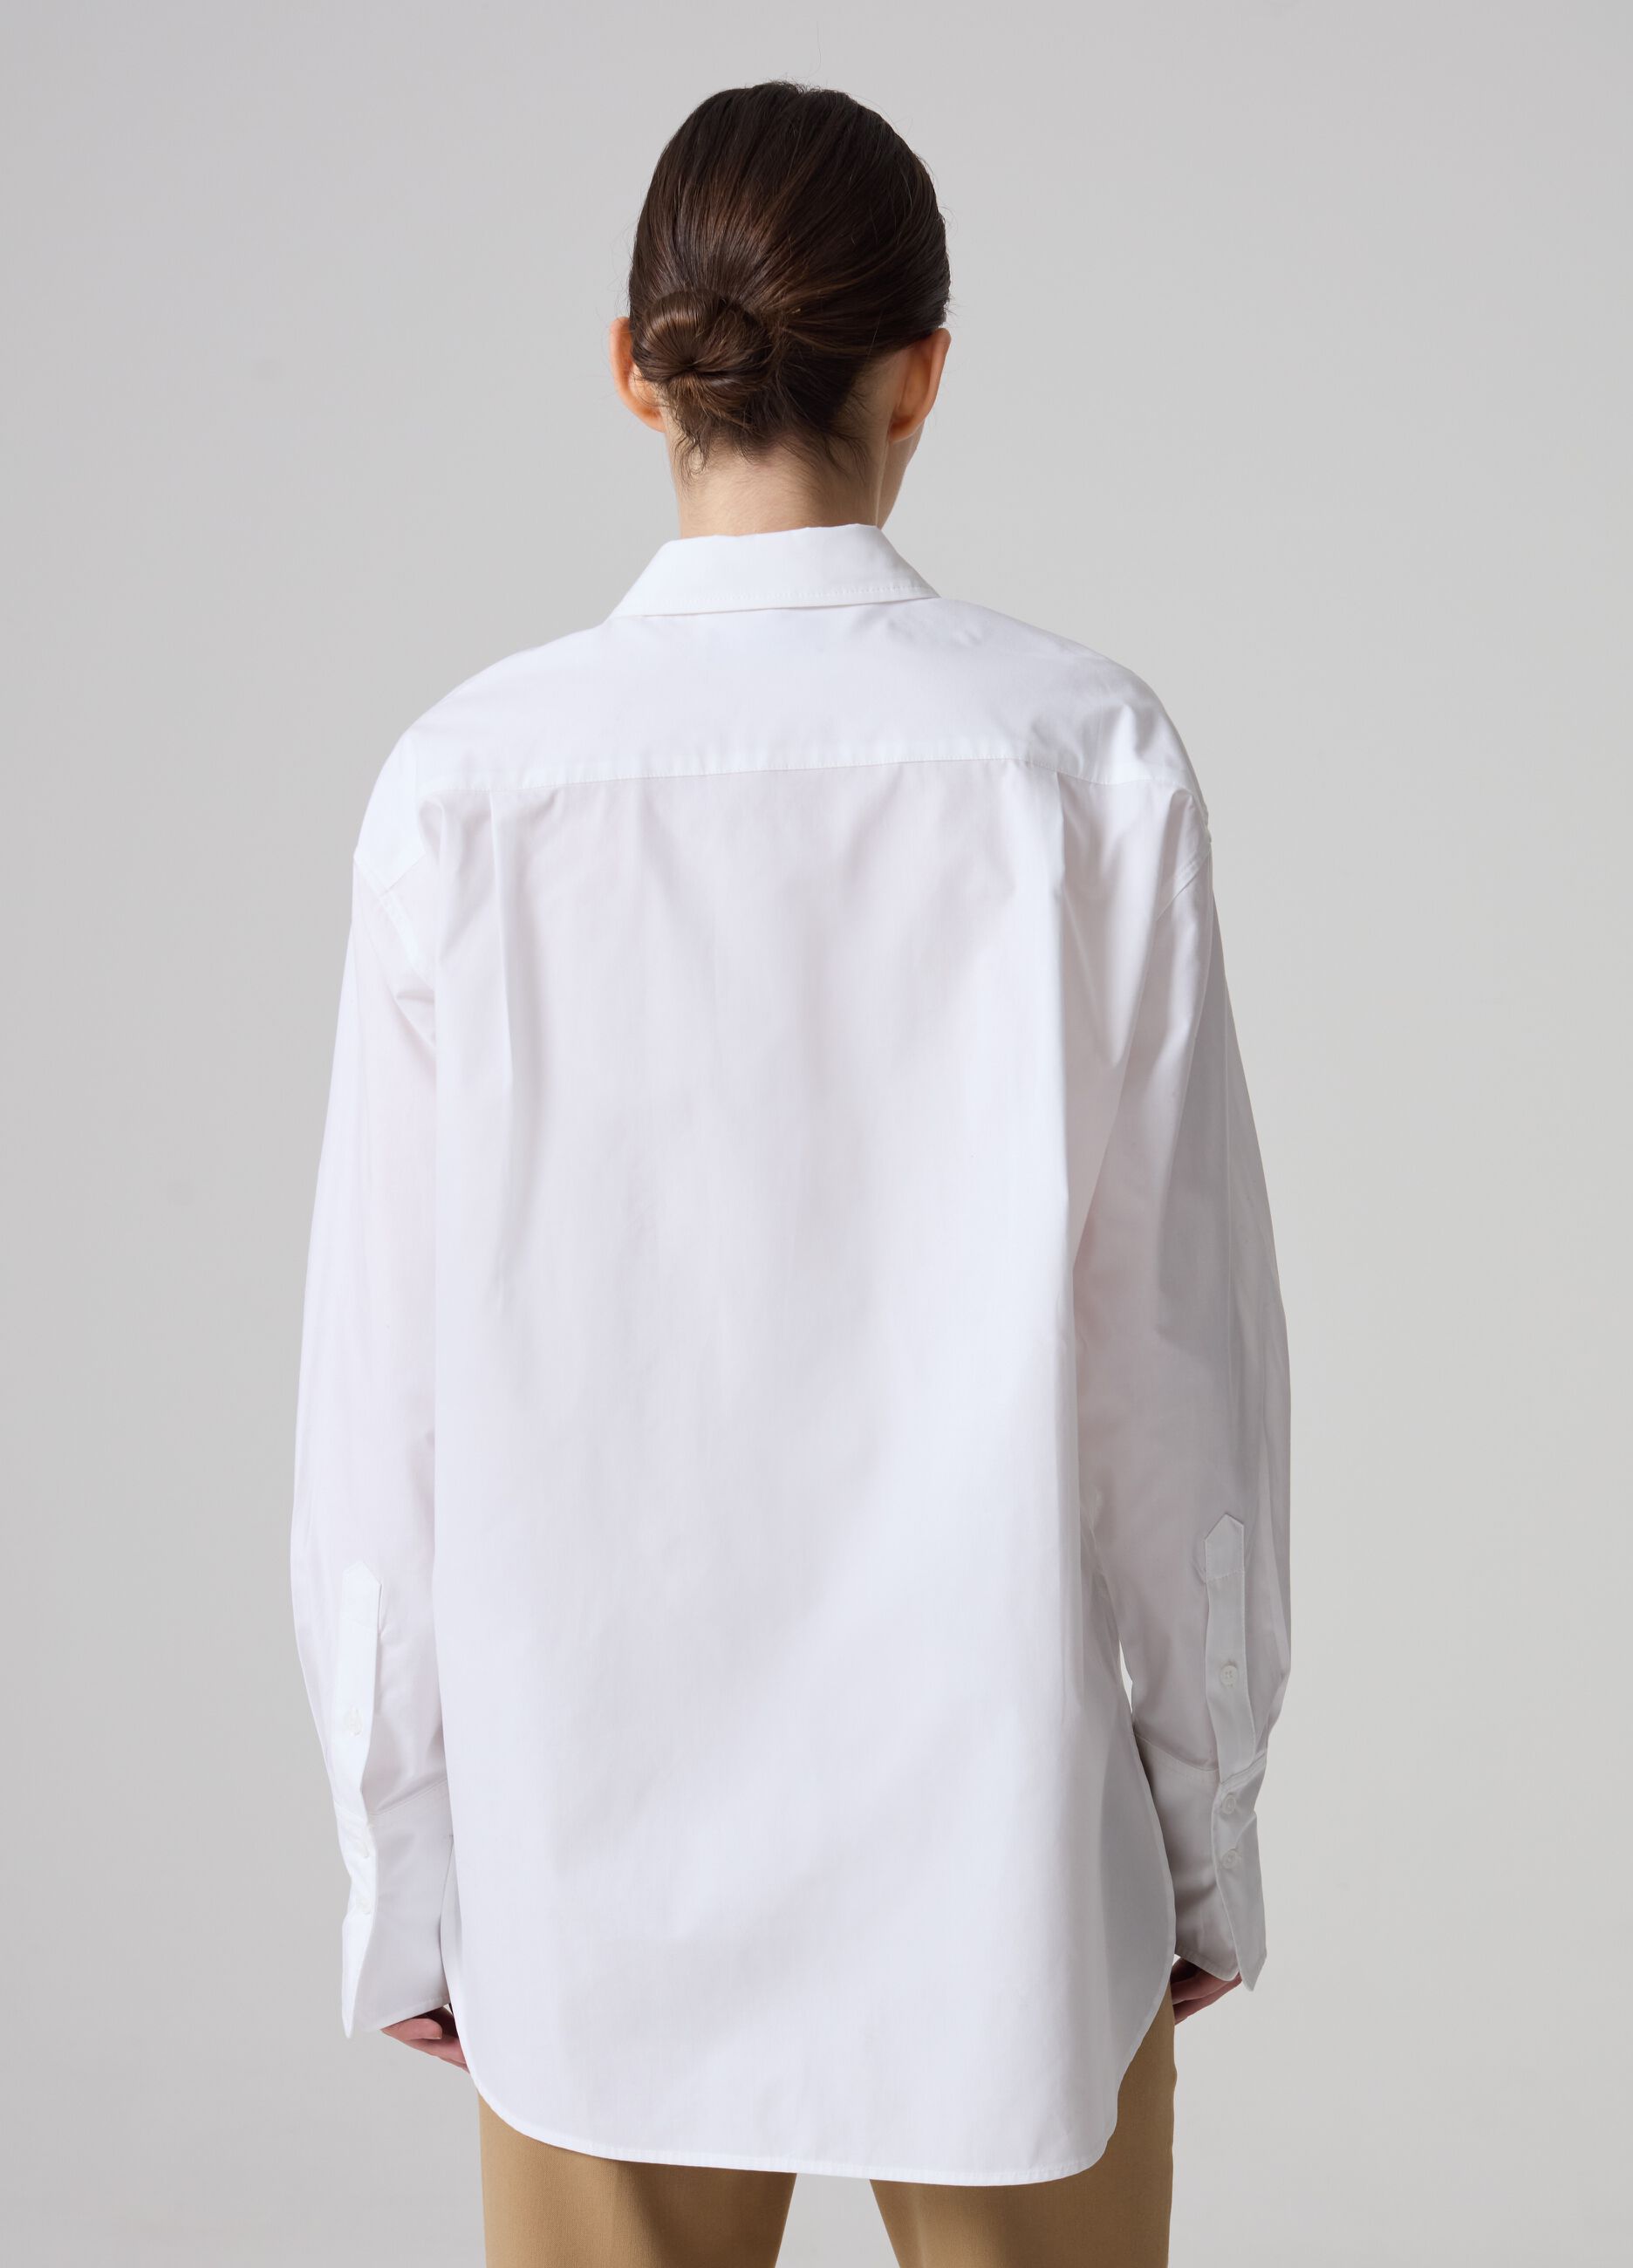 Contemporary shirt with pleated plastron